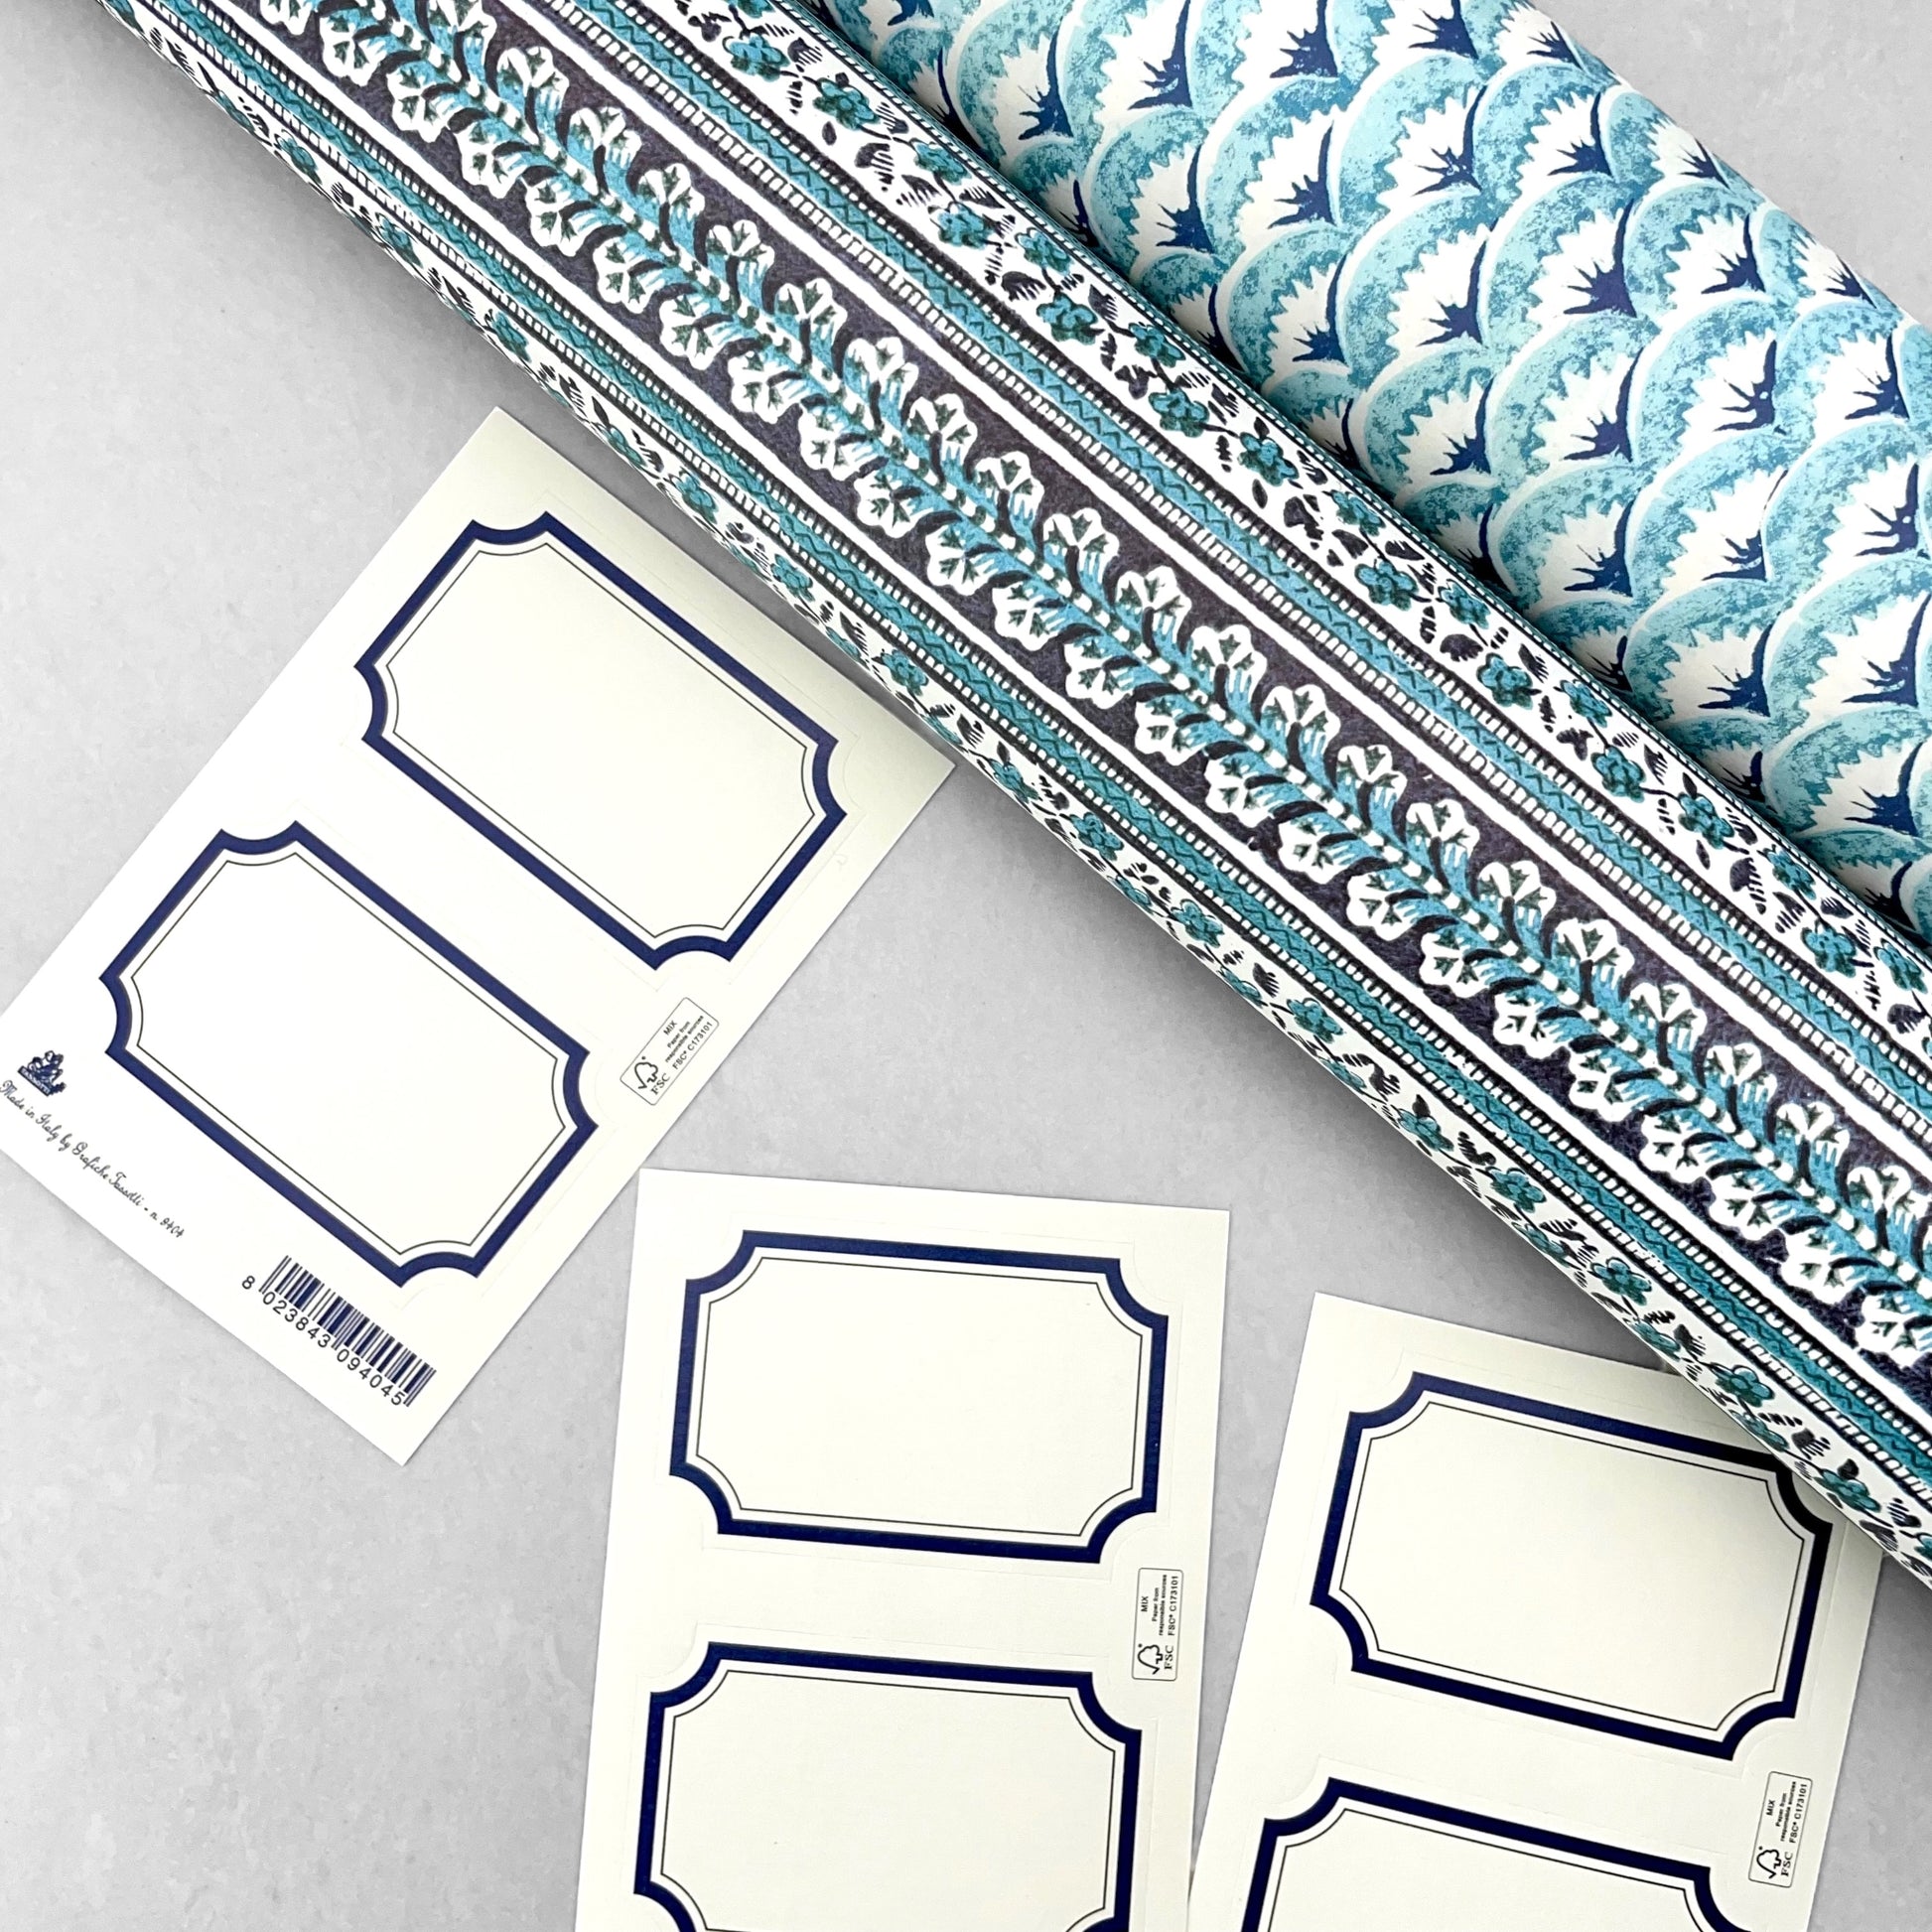 Adhesive labels made of ivory paper with a blue rectangular border by Grafiche Tassotti. Pictured alongside rolled wrapping paper